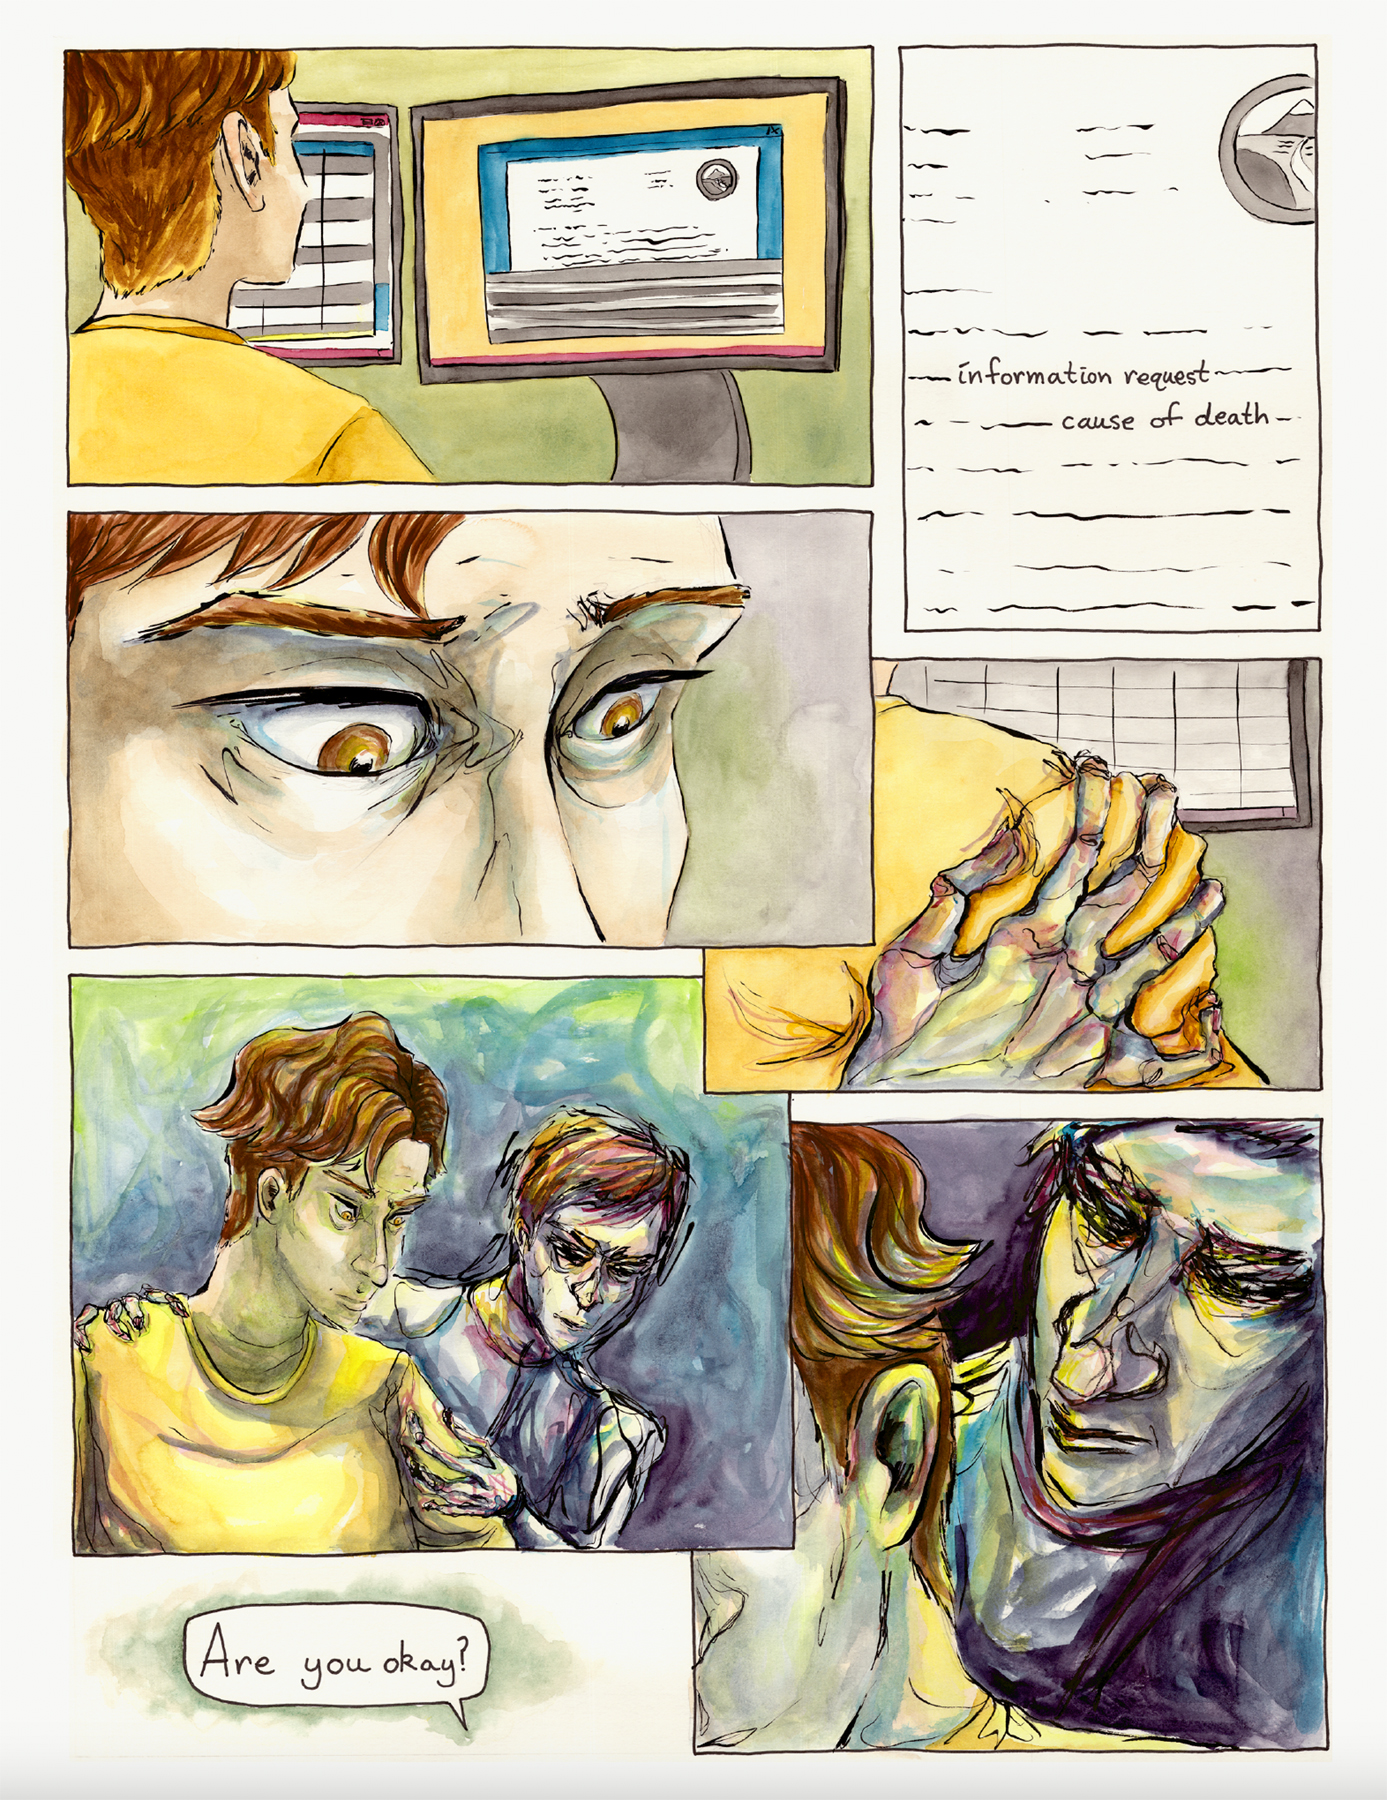 comic page from Against the Floor. Main character sees an information request for a cause of death on the computer. A dark figure appears over their shoulder and their co-worker asks if they're alright. Image courtesy of Daniell Stromanthe